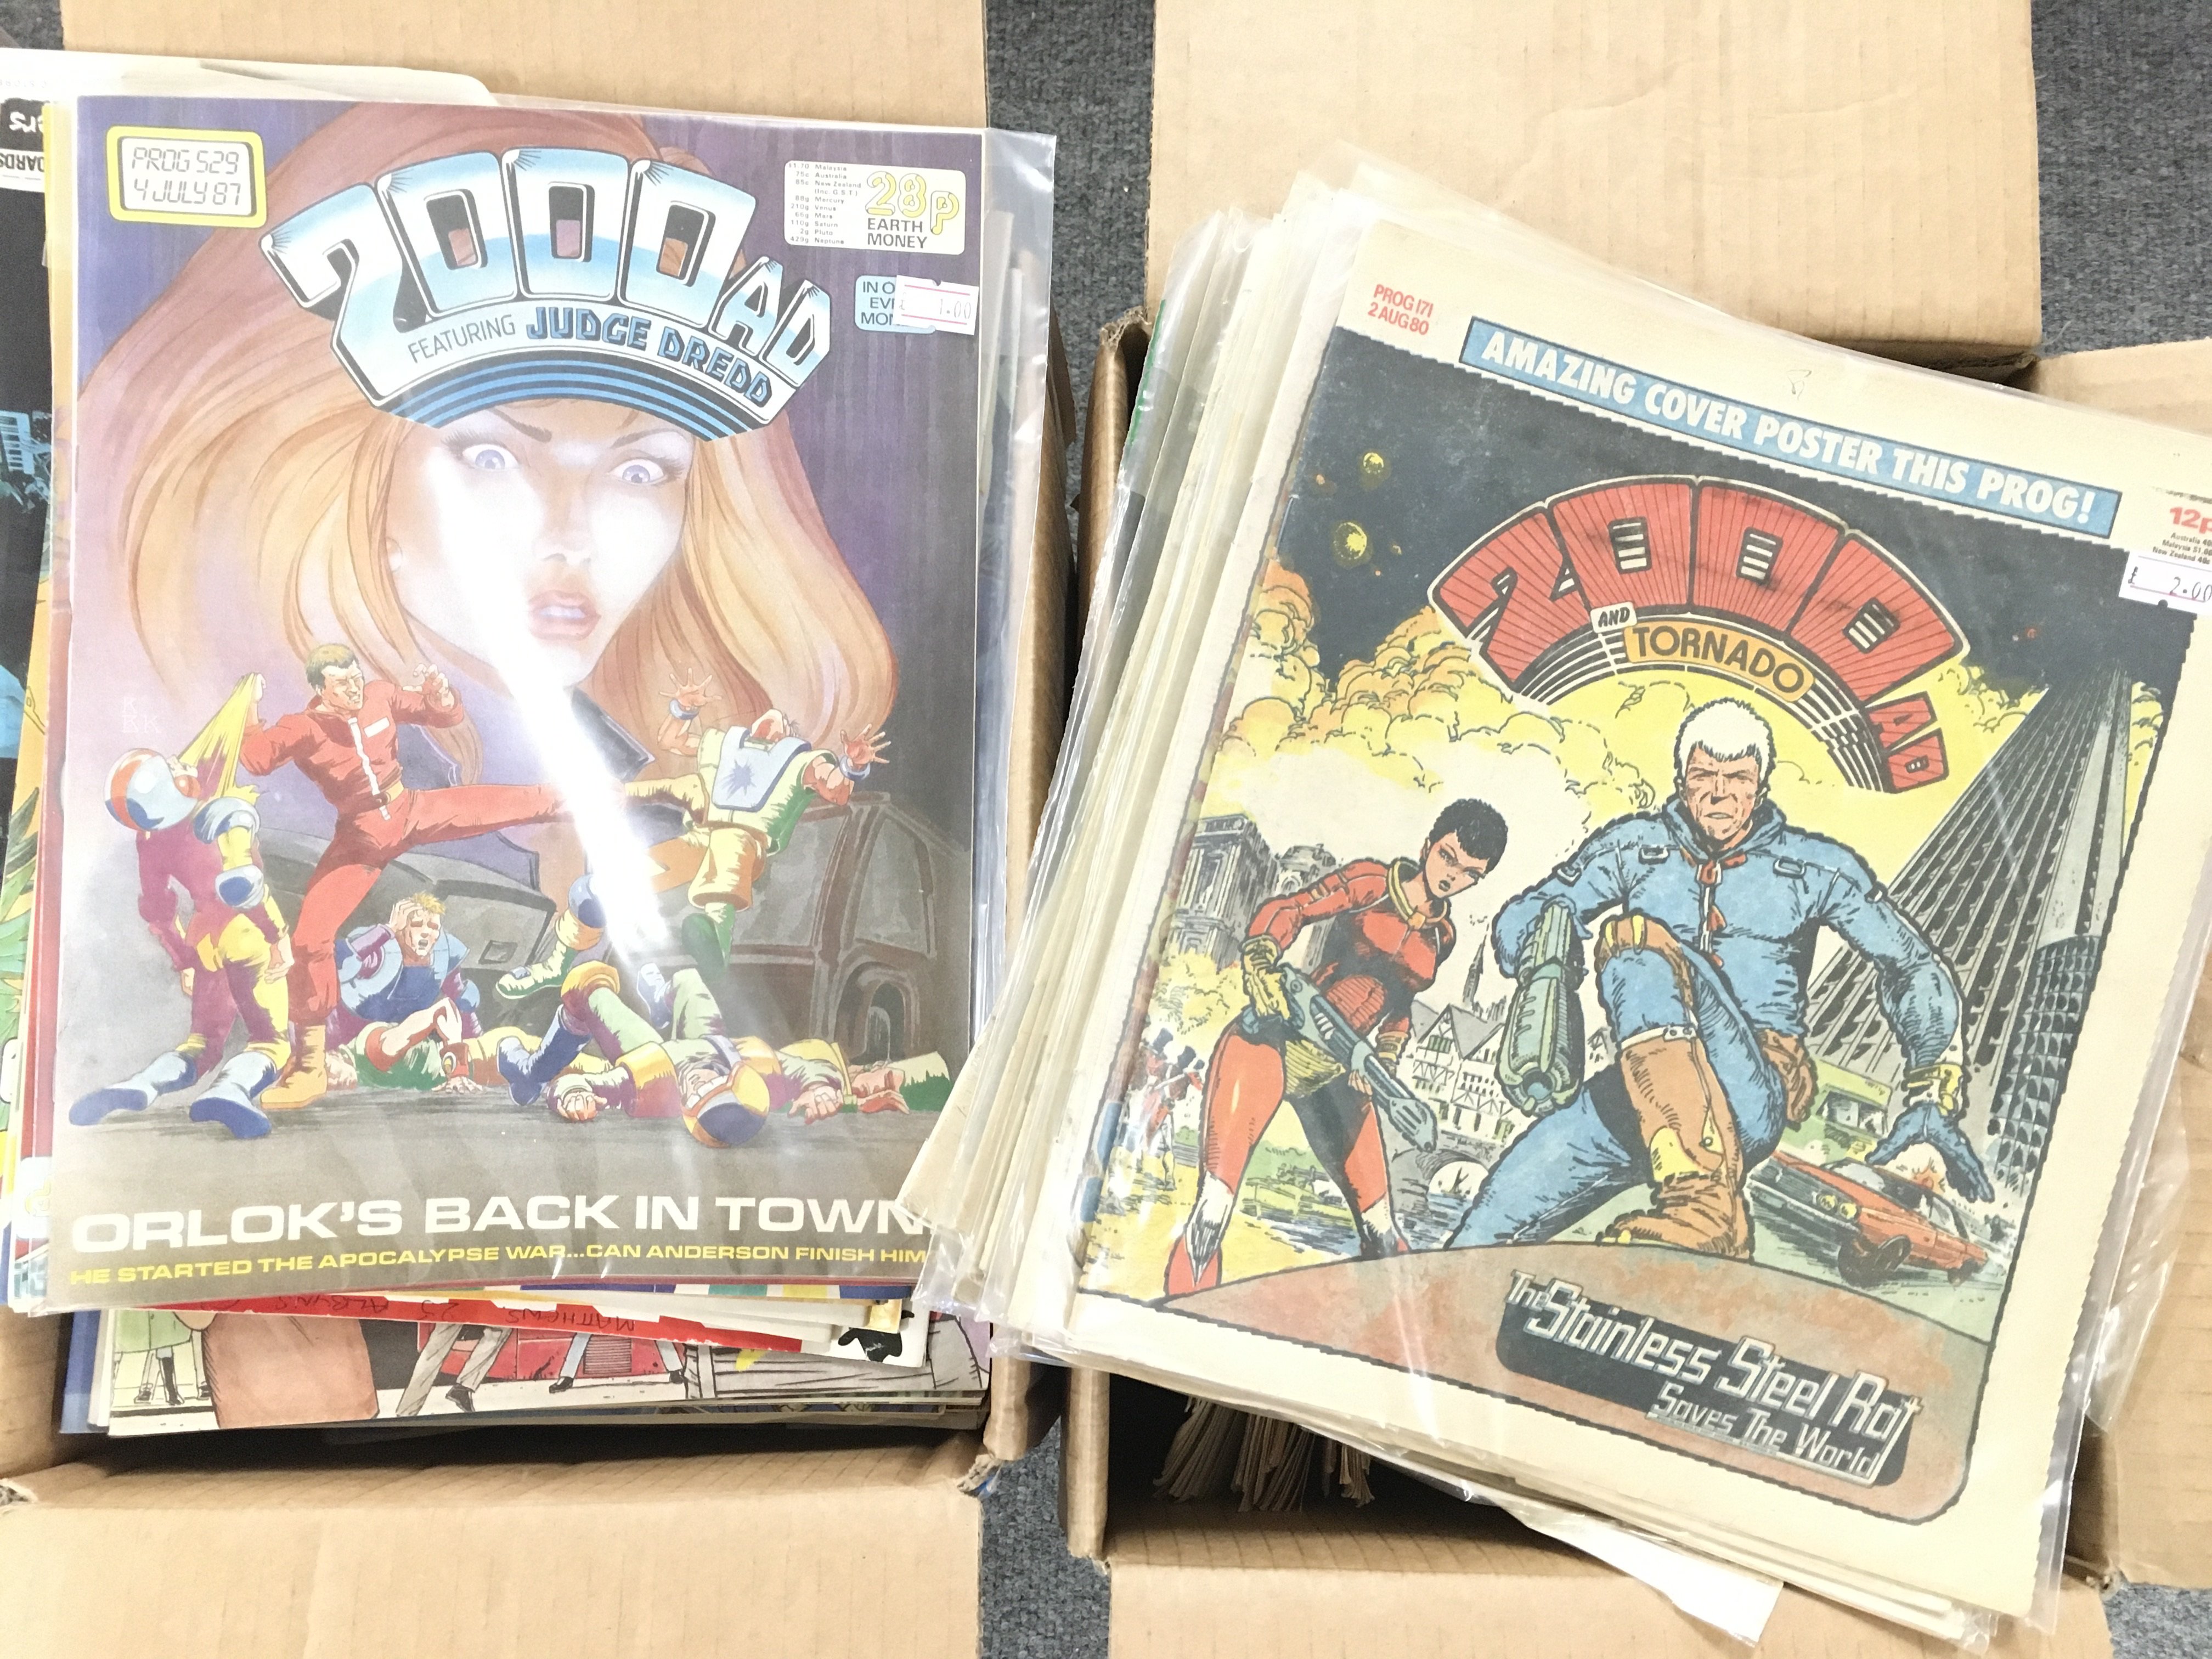 2 Boxes Containing A Collection of 2000 A.D Comics